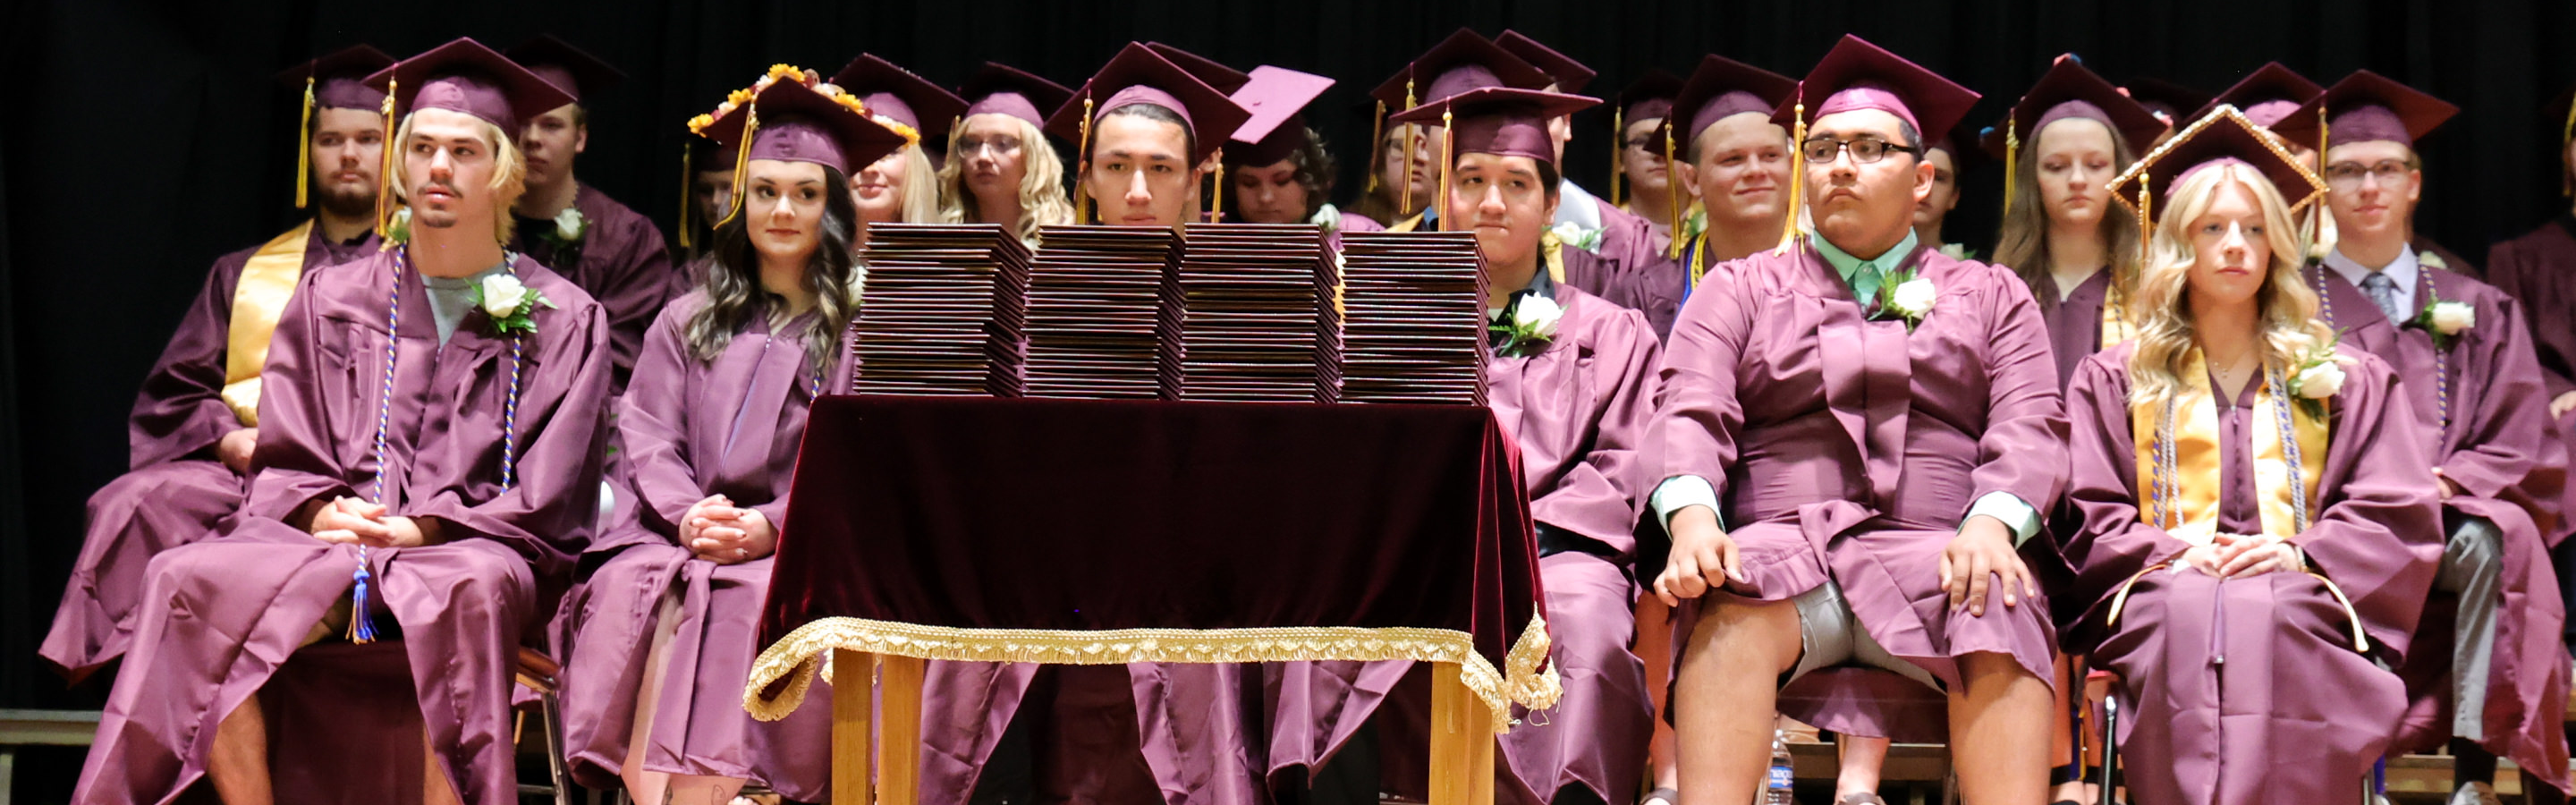 seniors sit on the stage in their caps and gowns at graduation